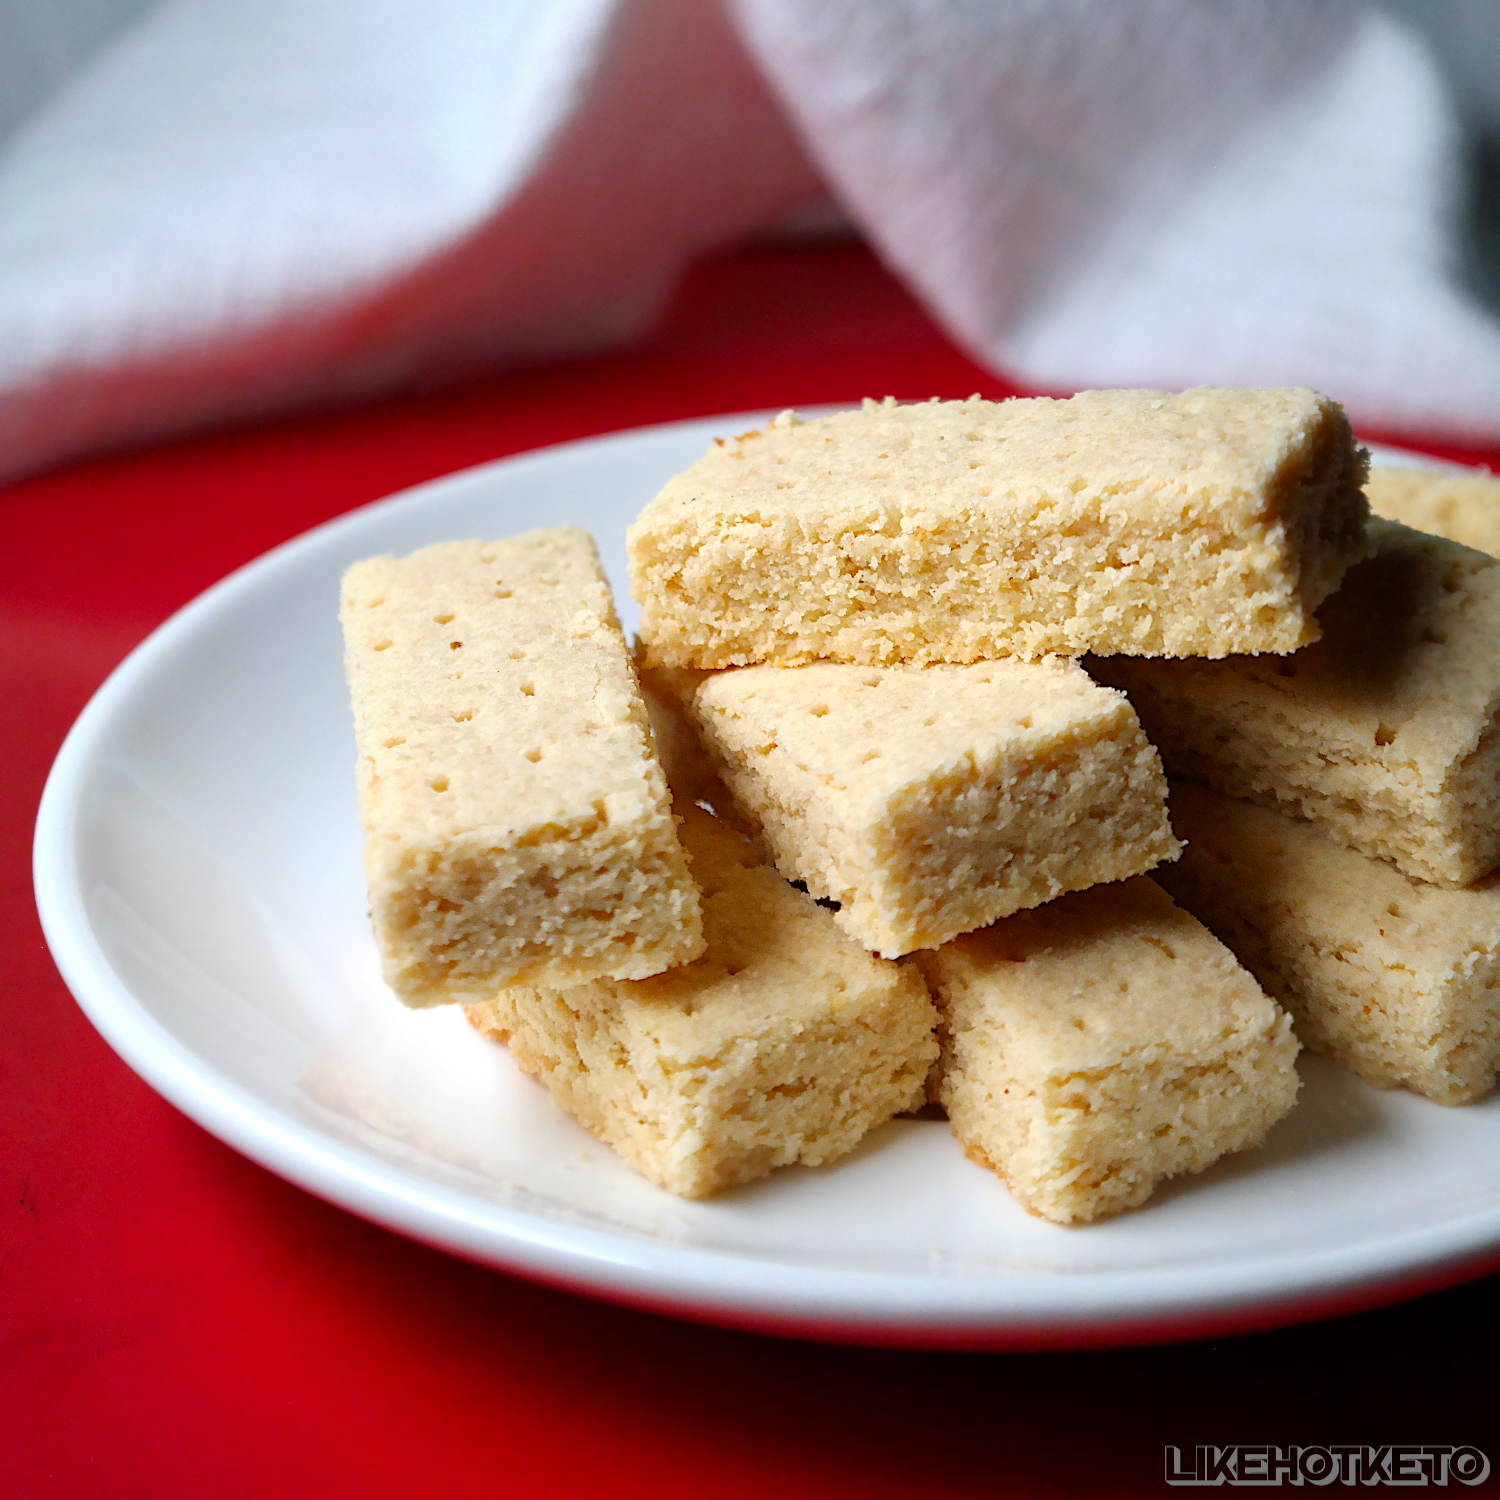 Sugar-free Scottish shortbread cookies piled up on a plate.